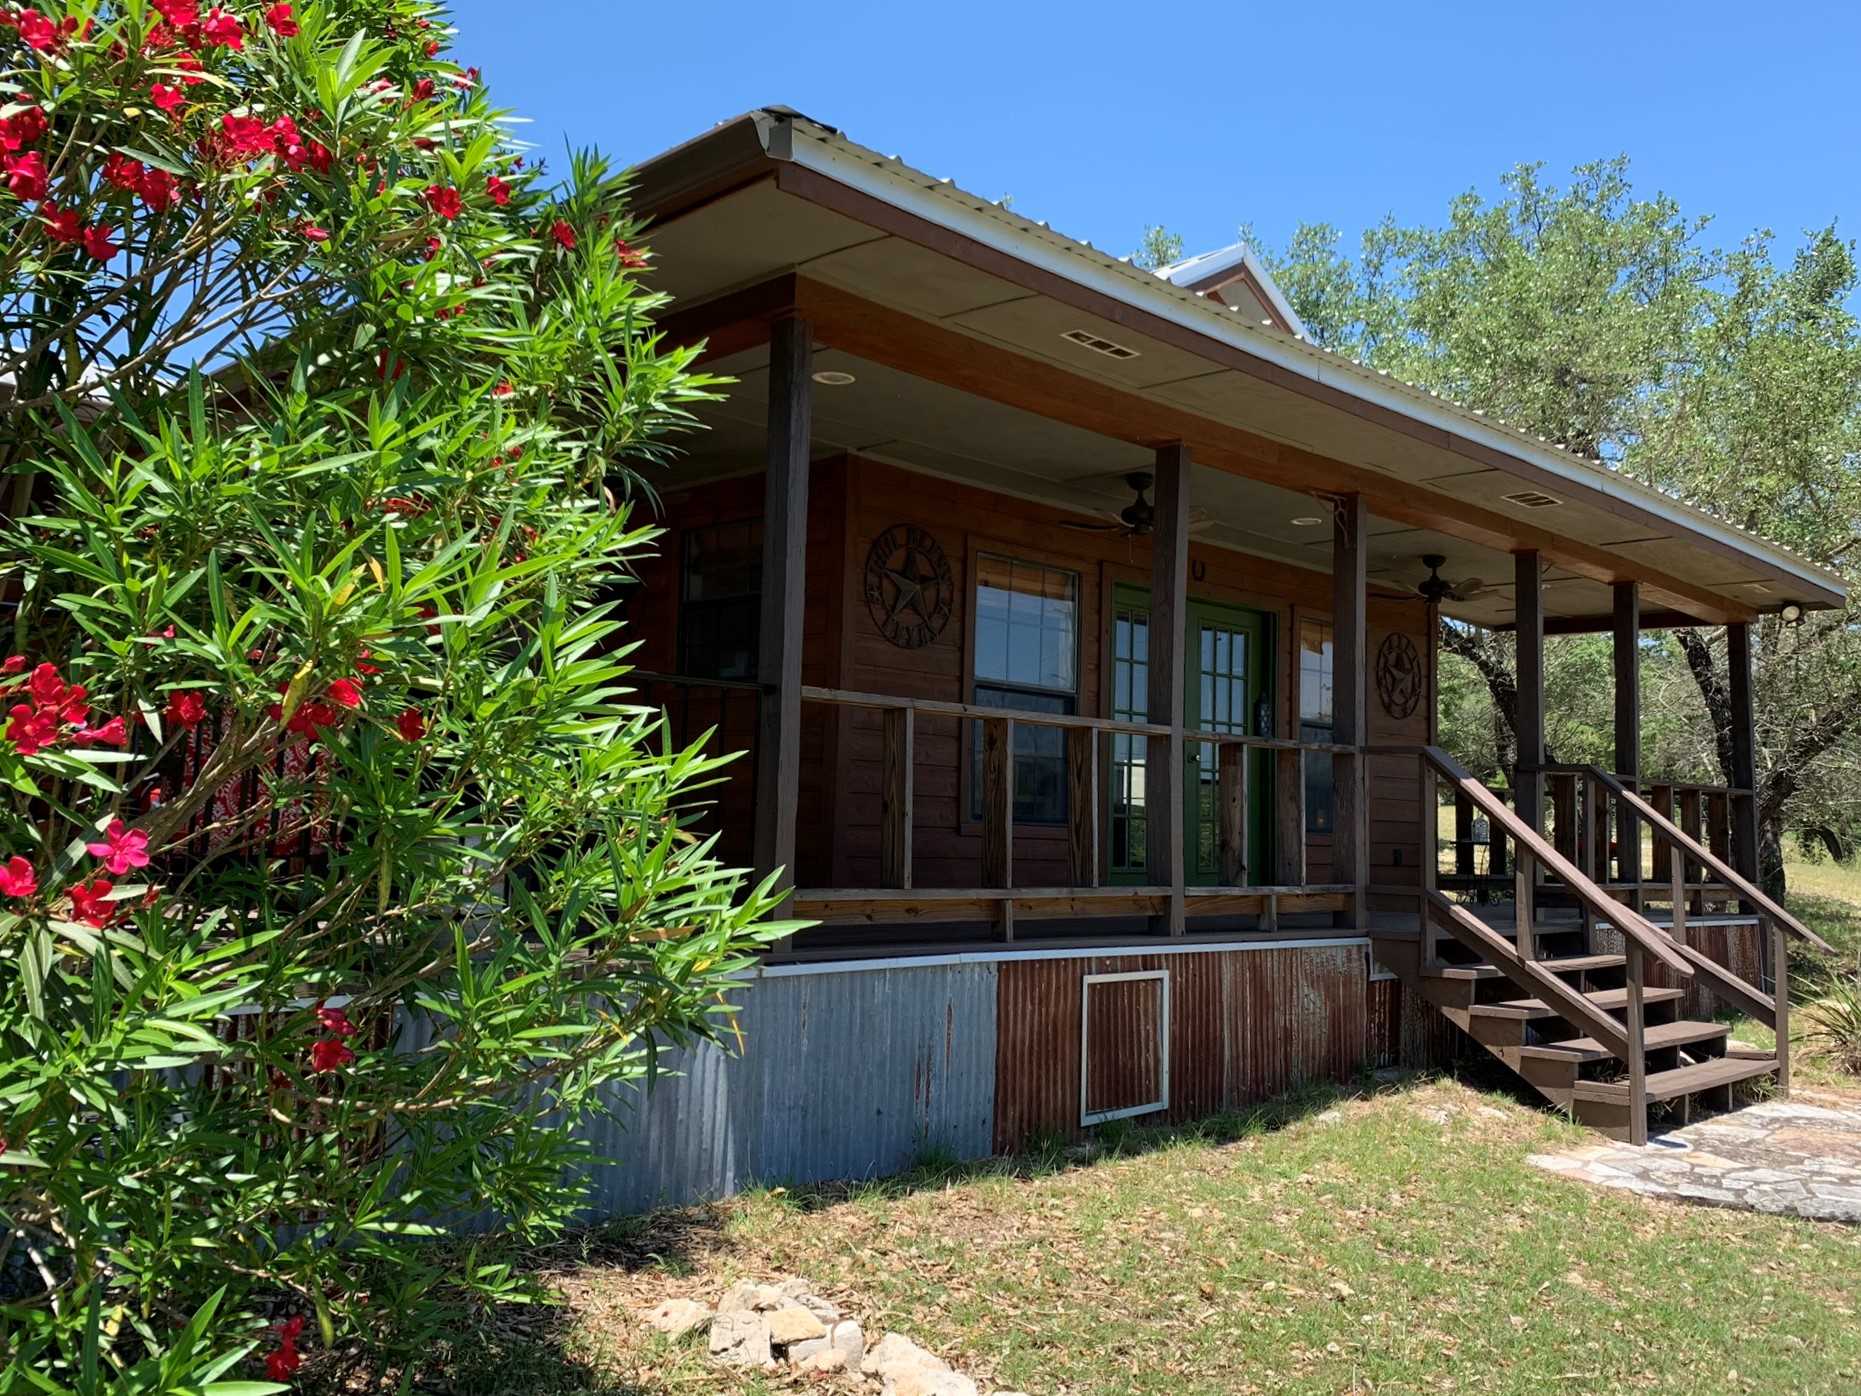                                                 This sweet romantic cabin sits on ten beautiful acres, remote yet convenient to fascinating Hill Country towns.